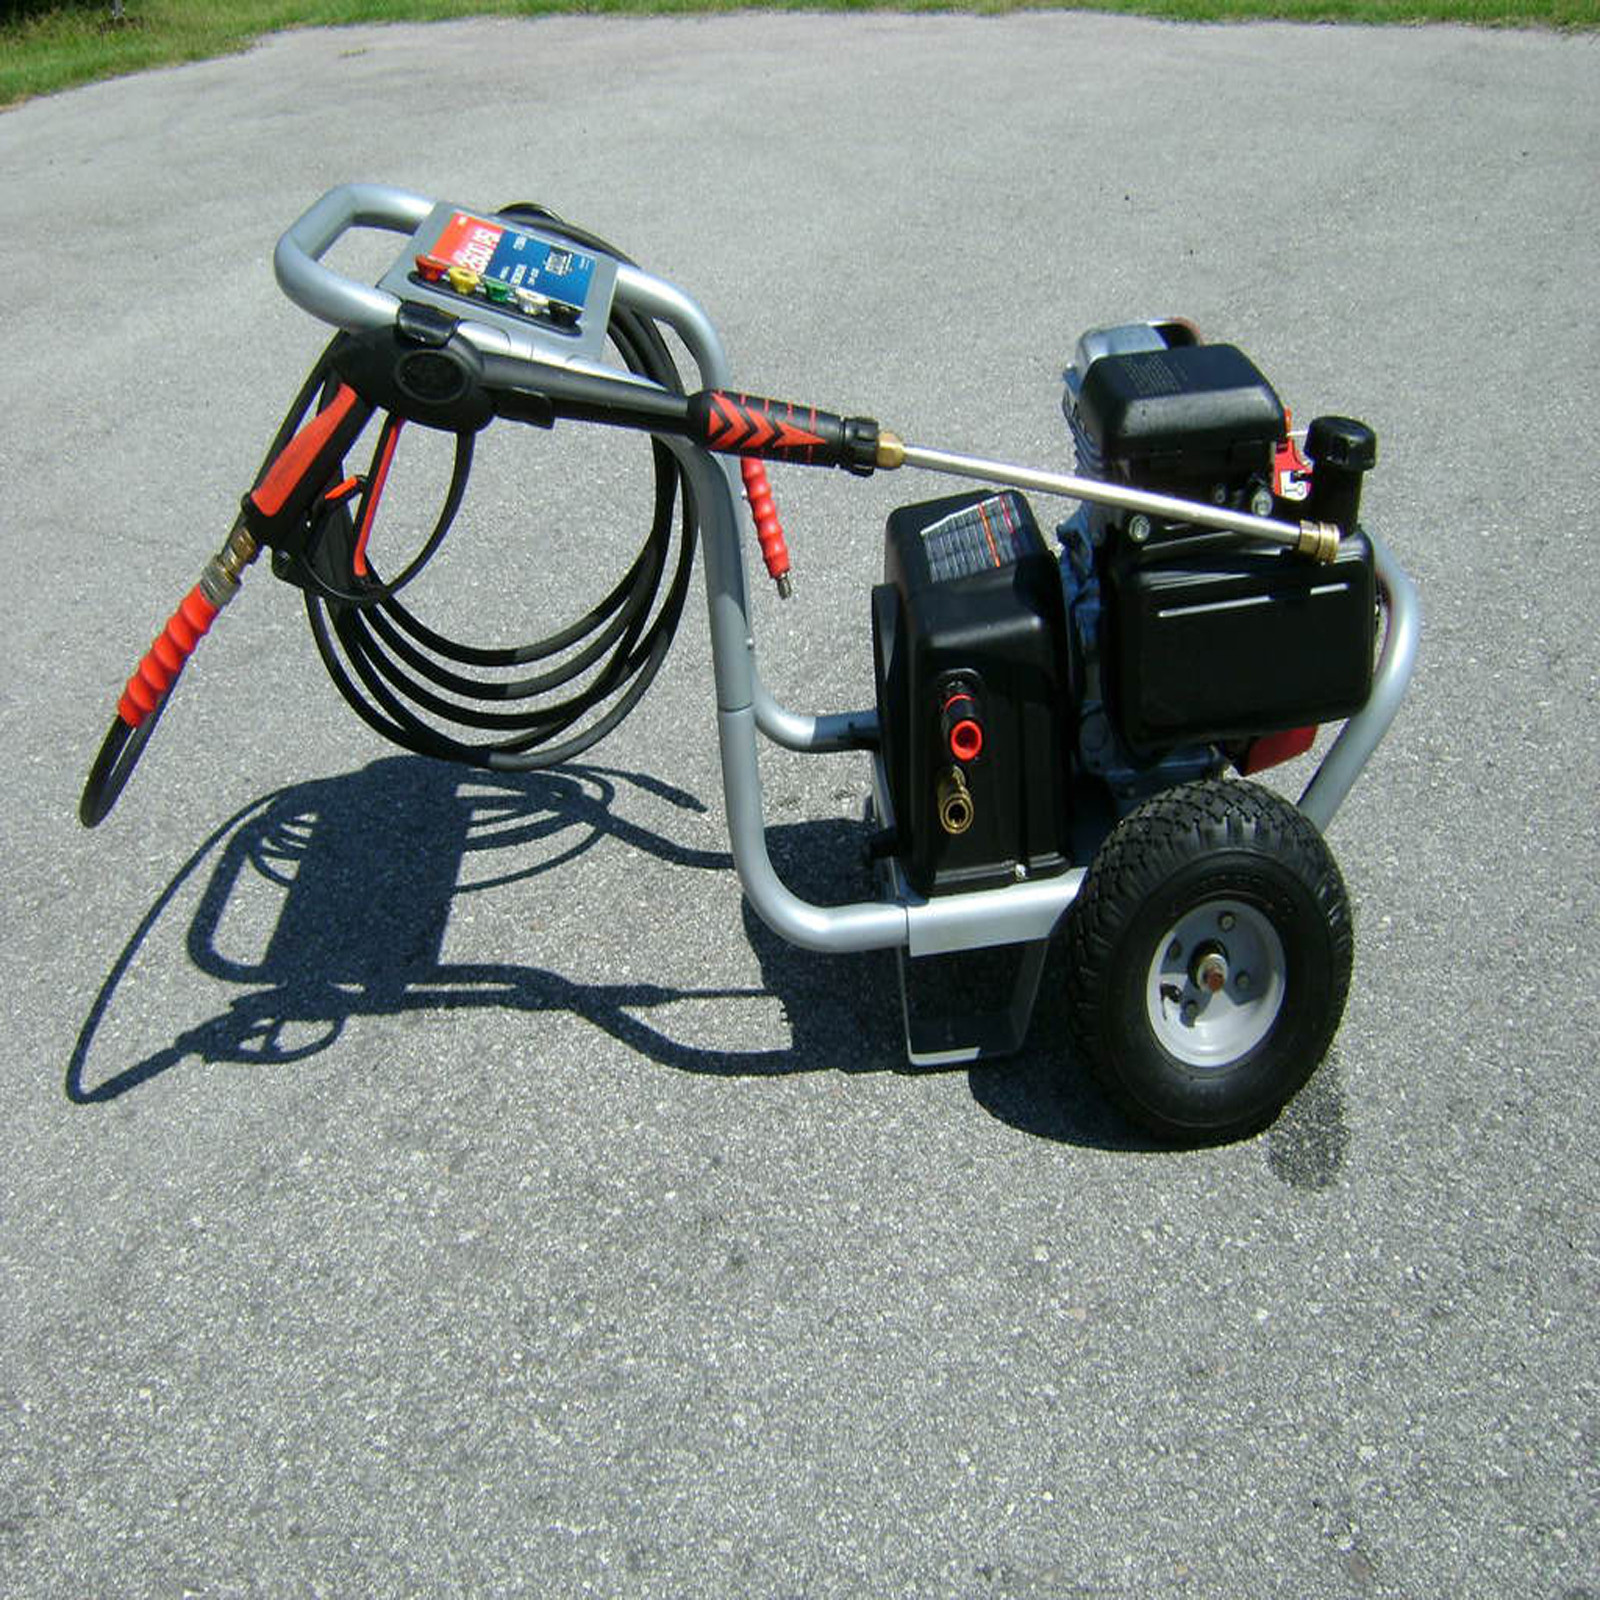 excell pressure washer honda engine manual xr2500